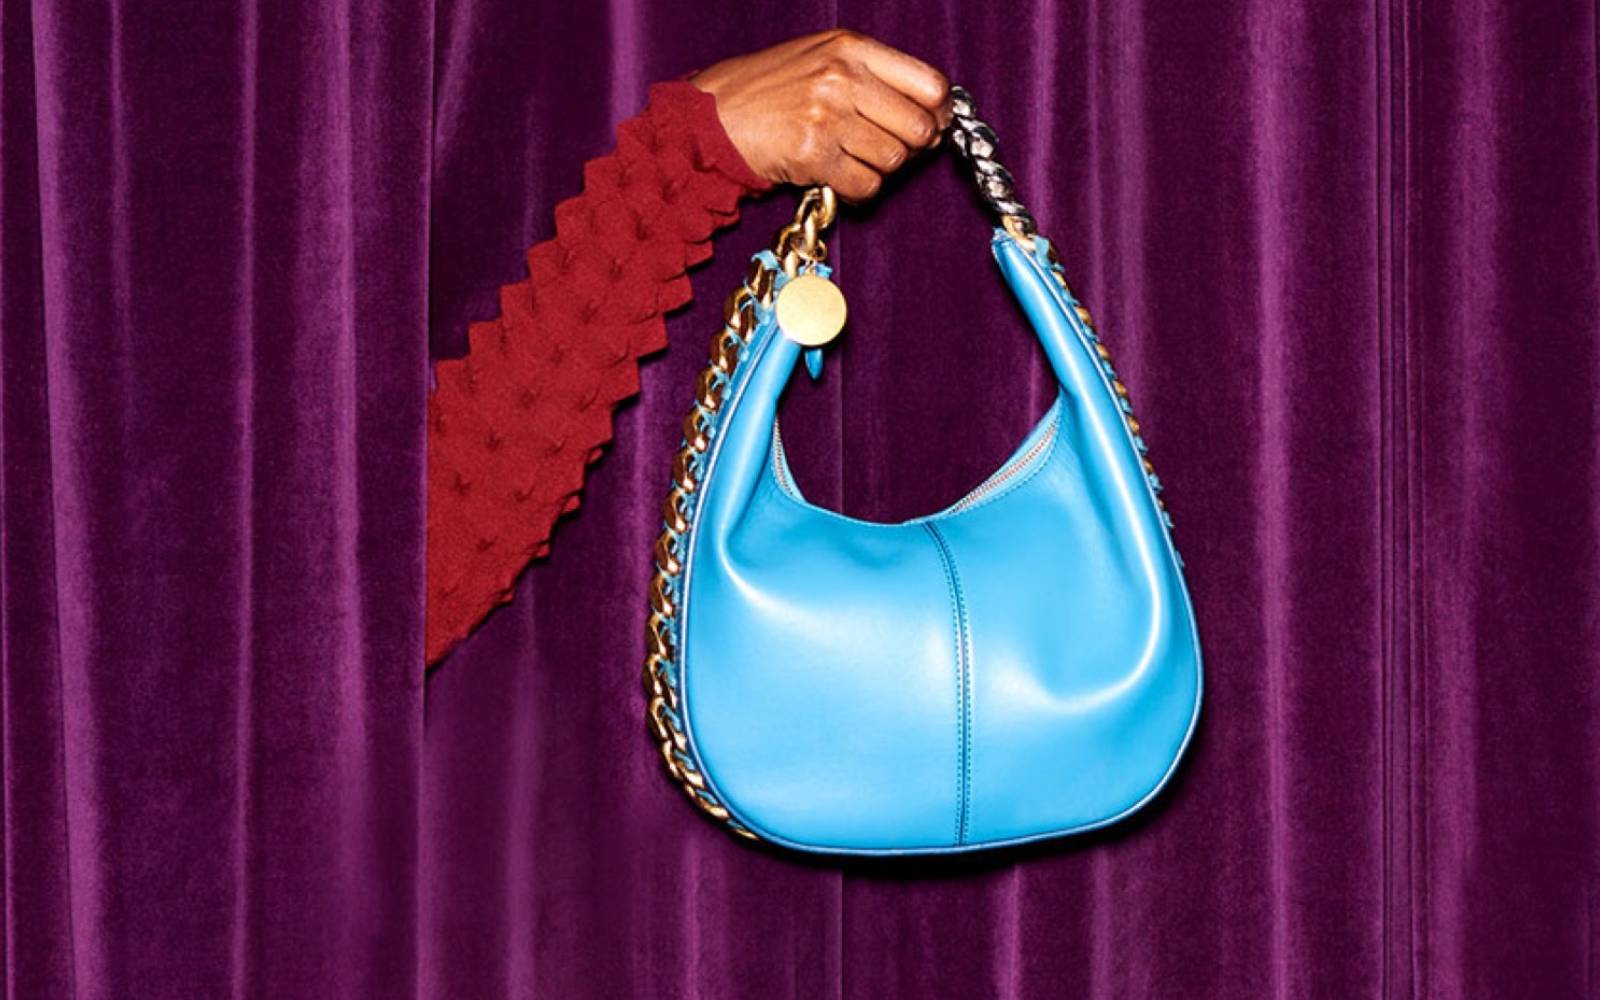 It's this season's must-have Hermès bag. And it's made from fungus, Fashion